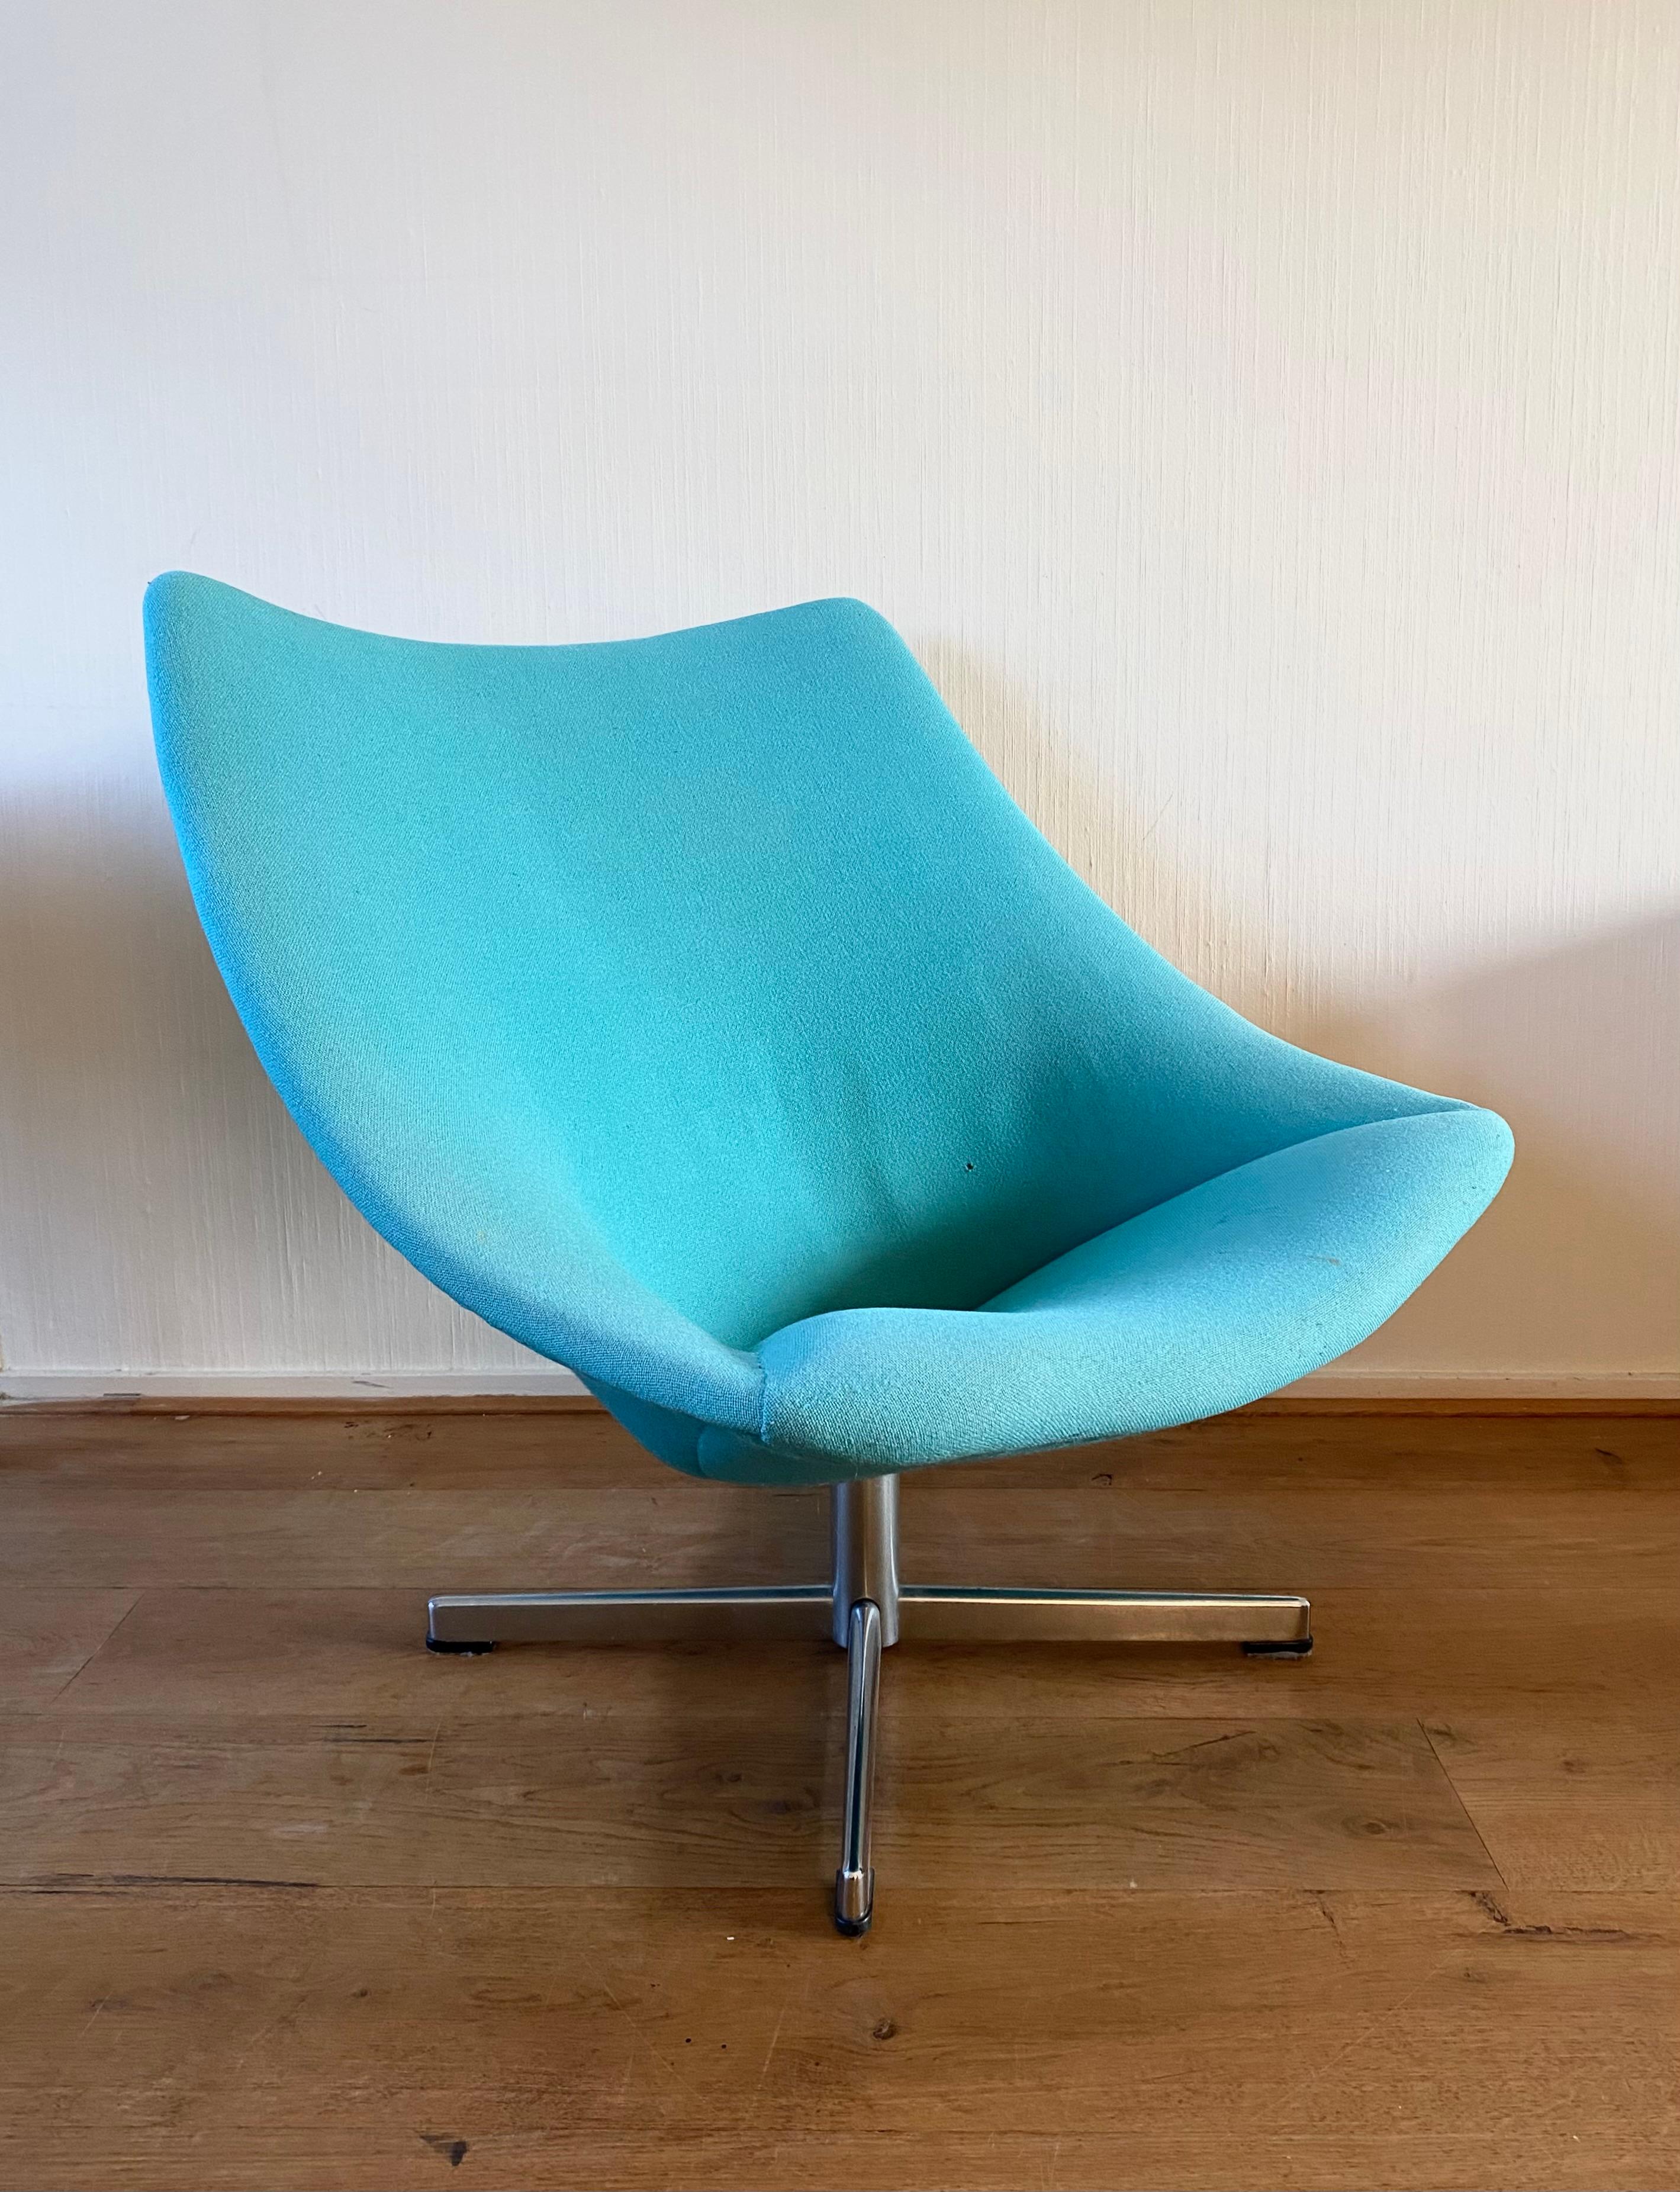 Metal The Large And Rare Artifort Version Oyster Chair By Pierre Paulin, 1960s For Sale